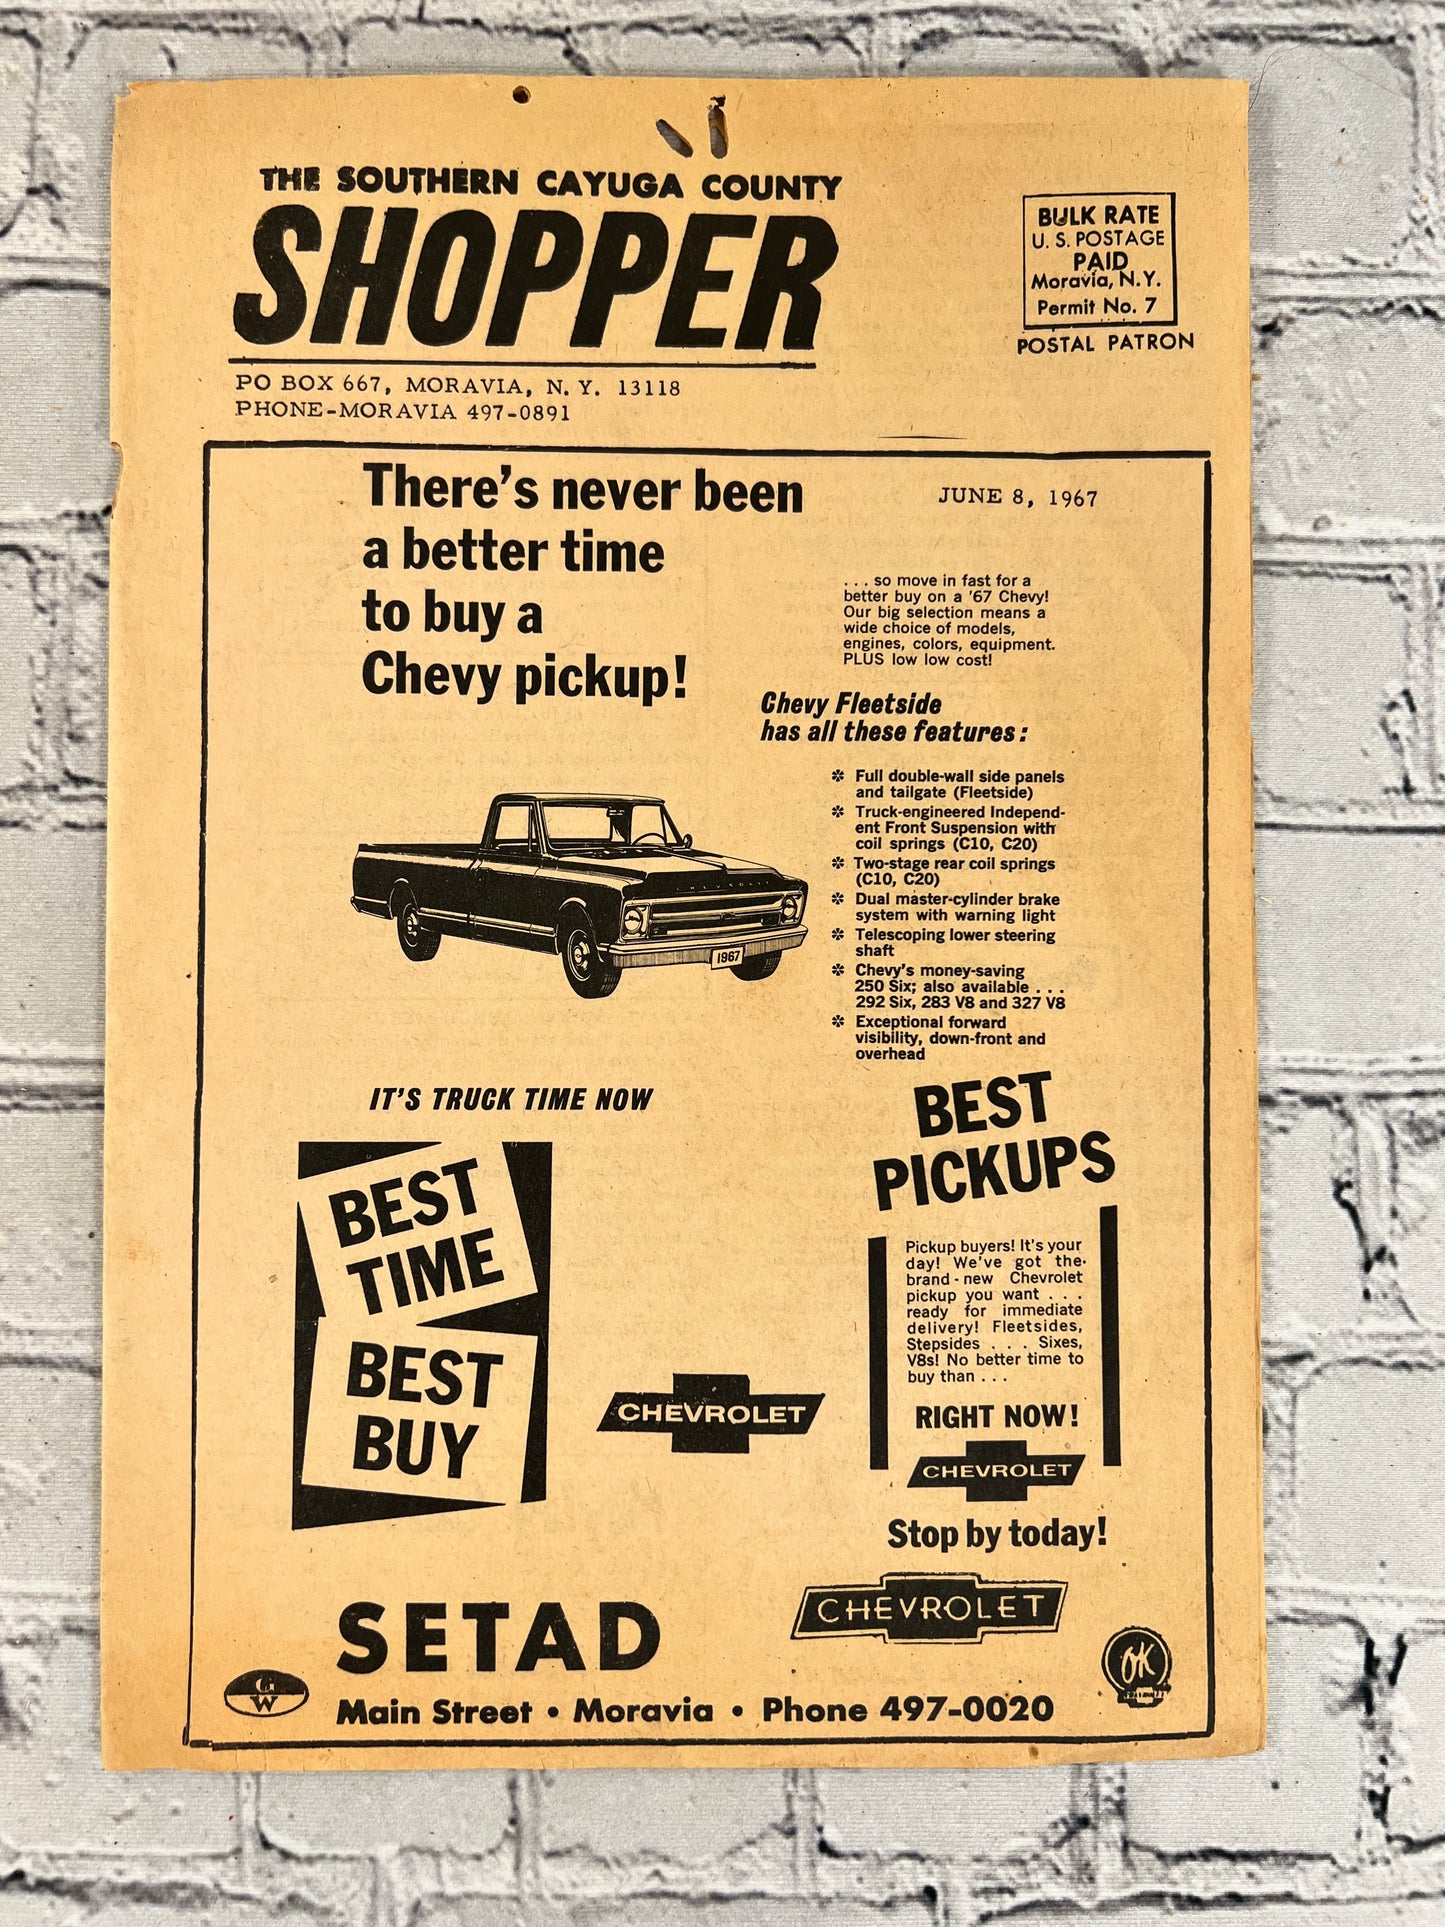 The Southern Cayuga County Shopper June 8, 1967